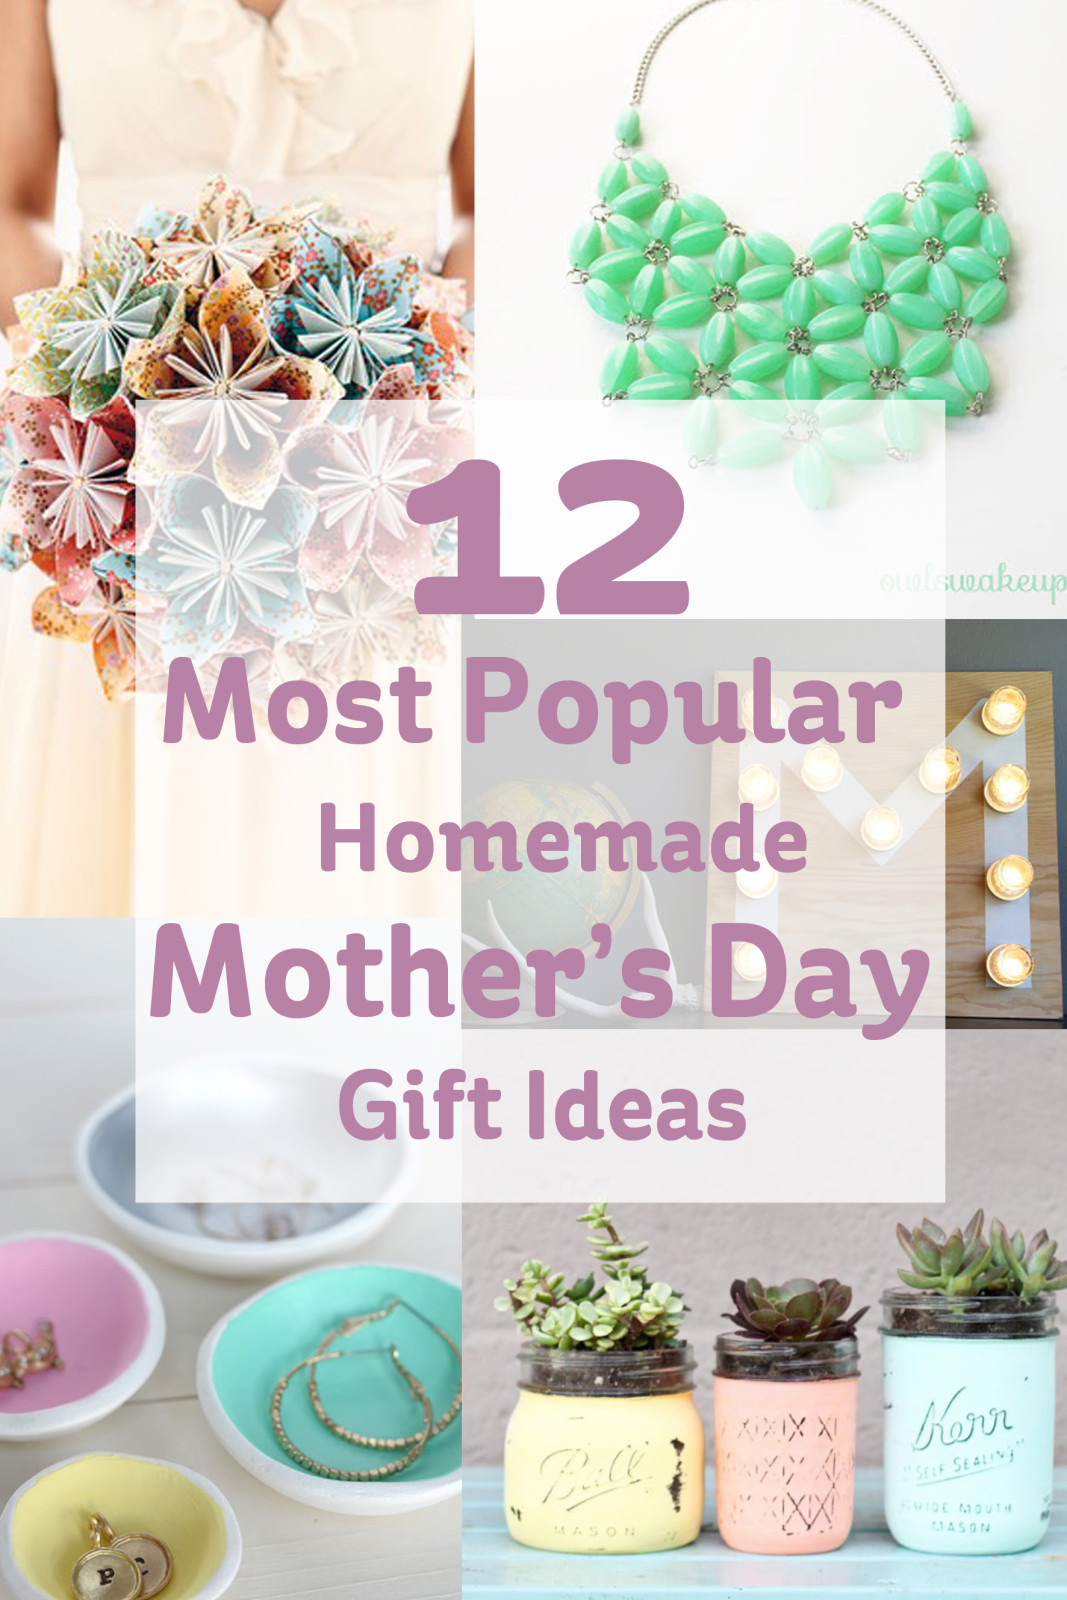 Homemade Mothers Day Gift Ideas
 12 Most Popular Homemade Mother s Day Gift Ideas